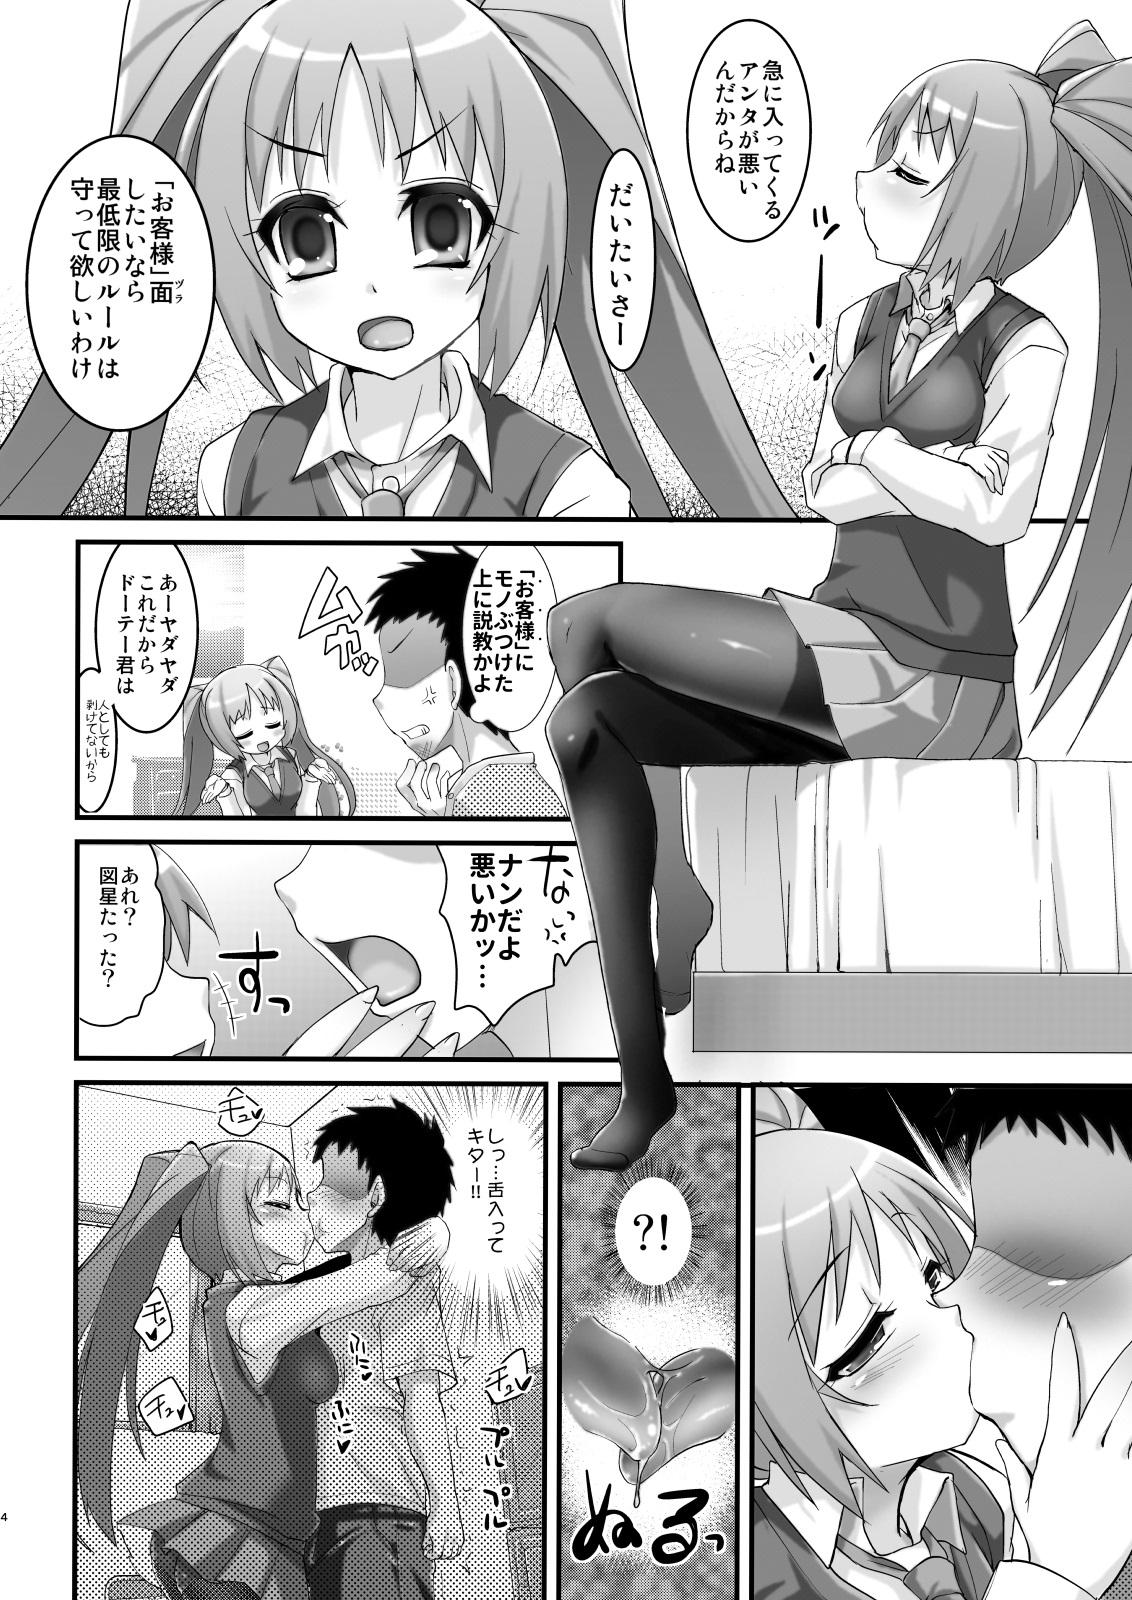 Small Boobs Tsundere Tights to Twintails - Original Relax - Page 4